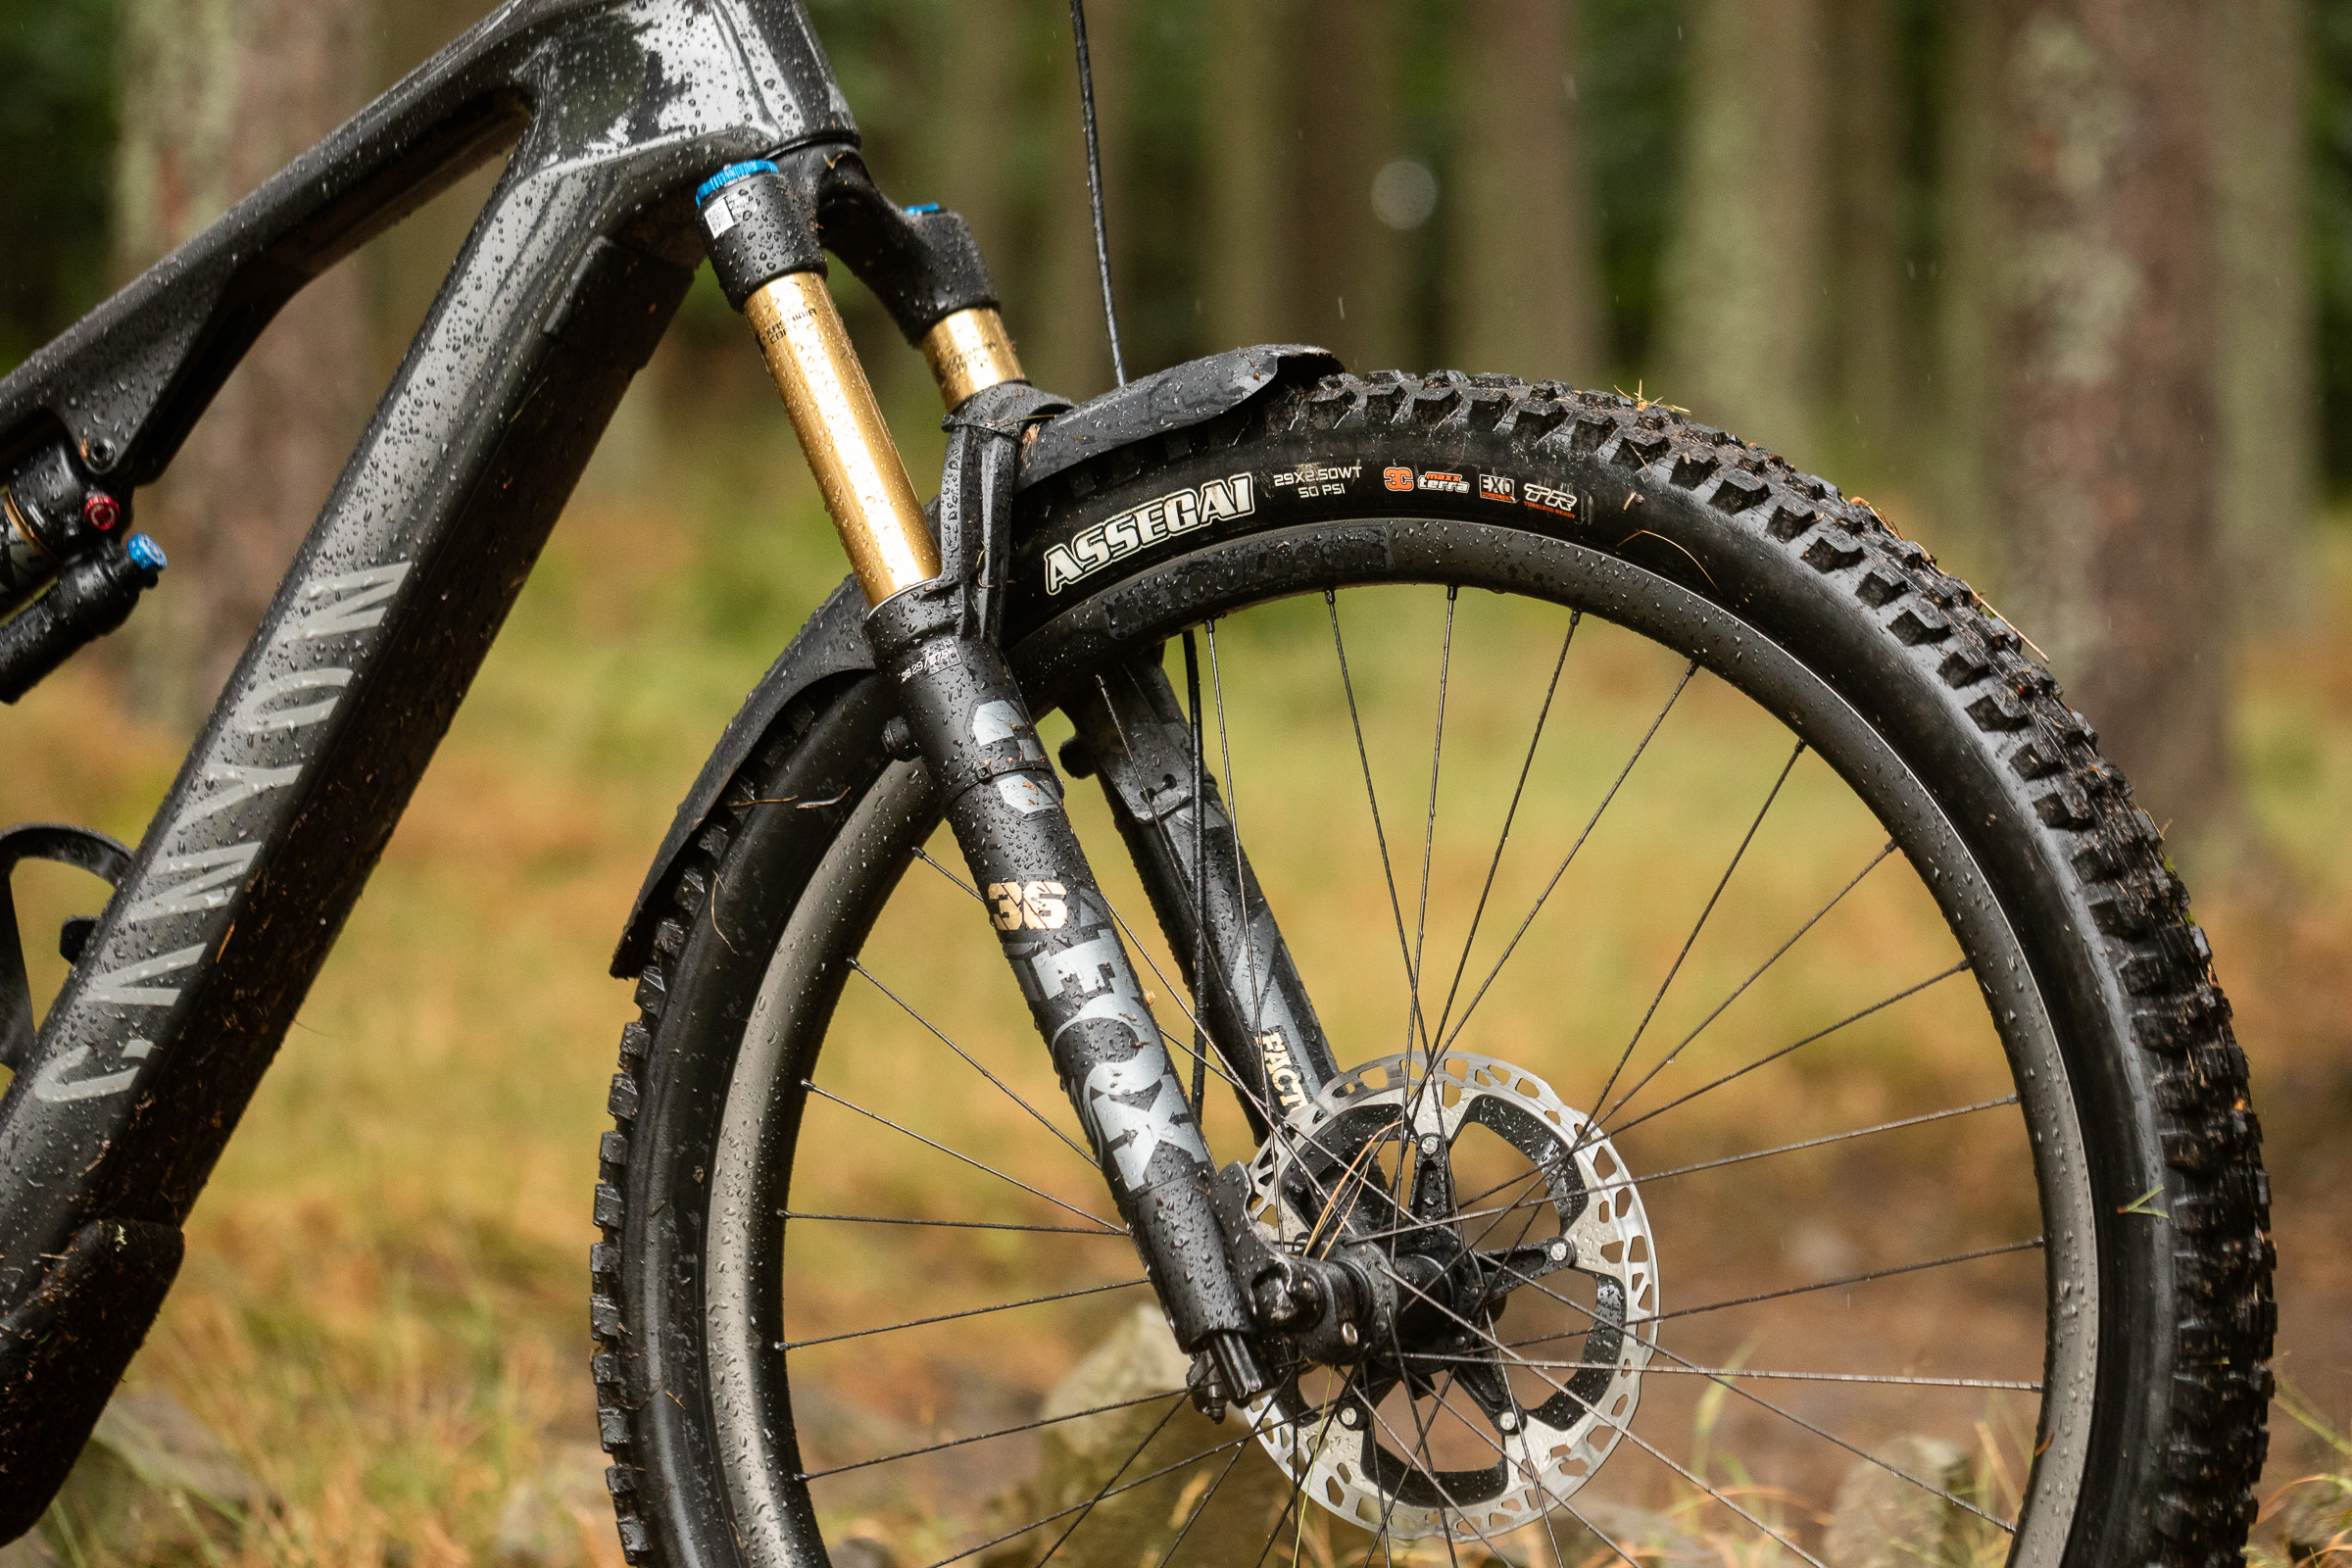 Buyer's guide to Fox forks | The full line-up, from cross-country